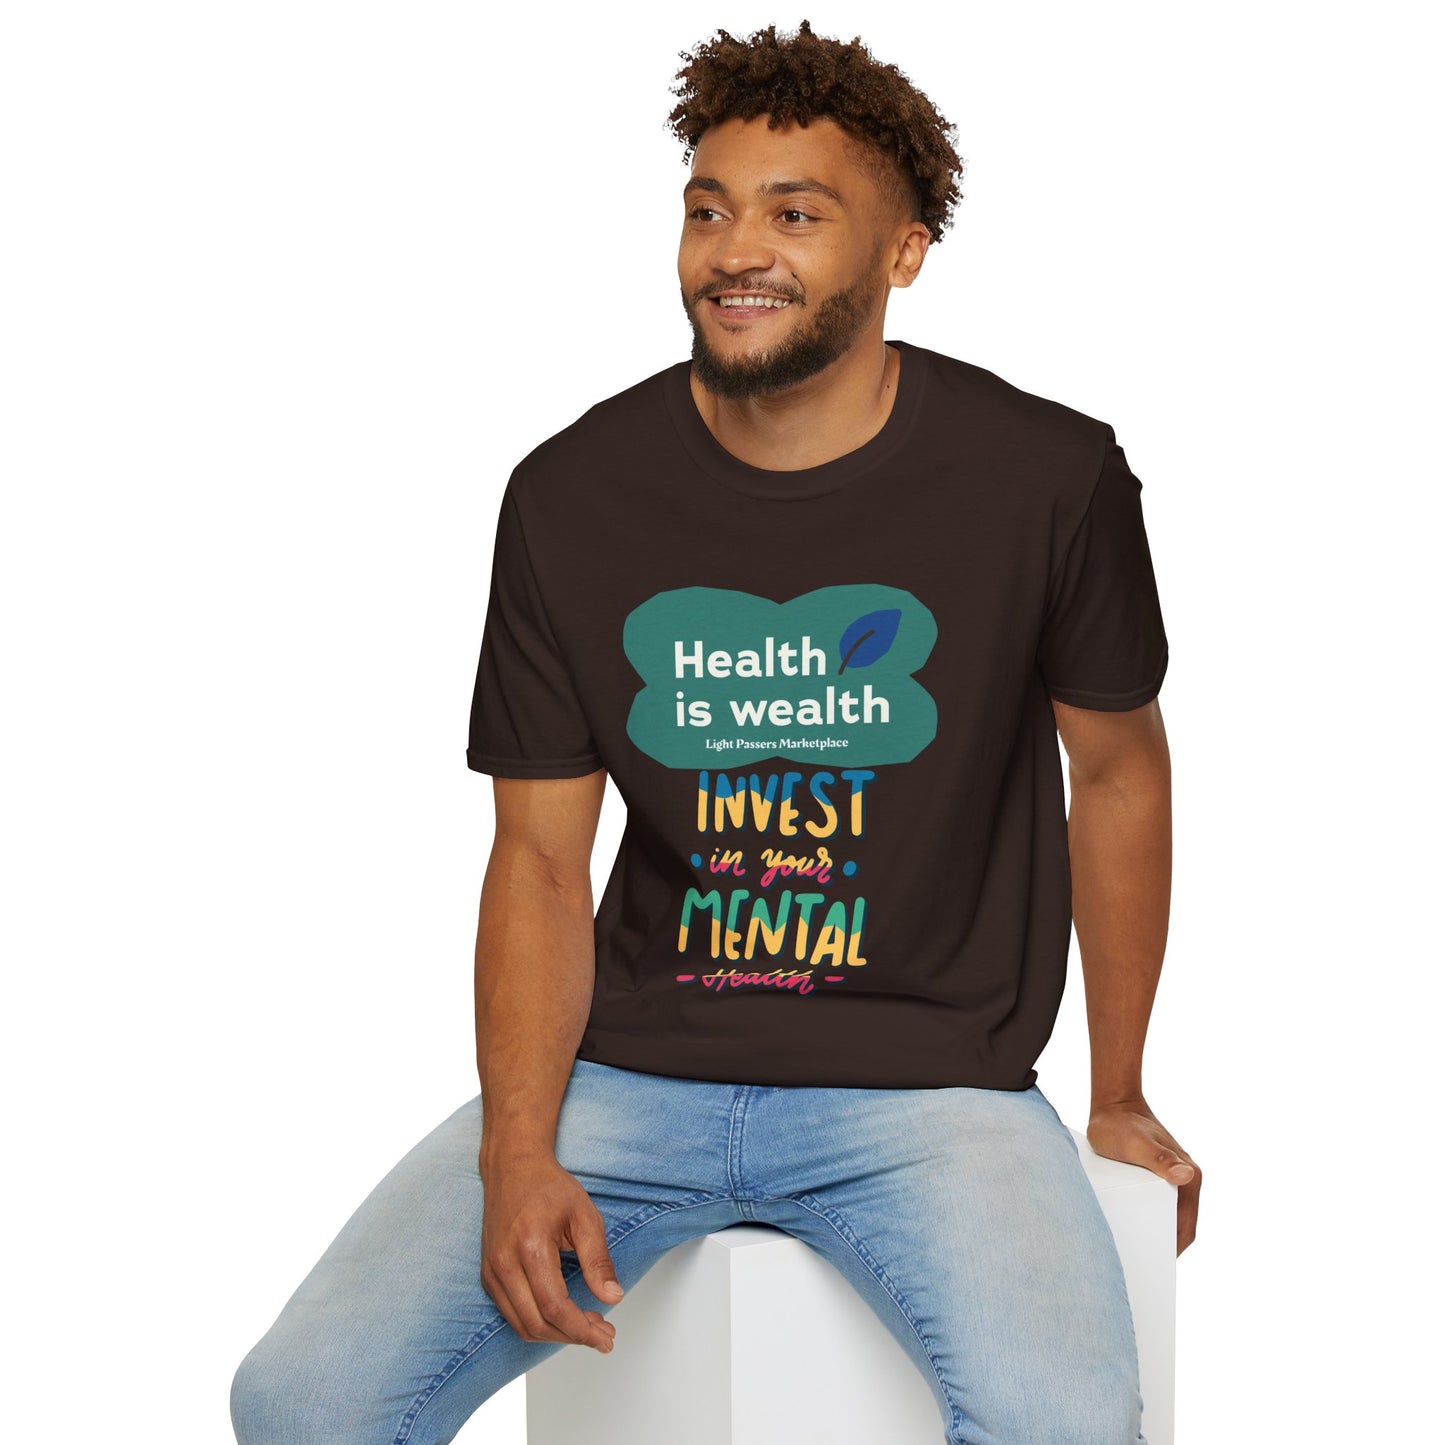 Light Passers Marketplace Invest in Mental Health Unisex Soft T-Shirt Mental Health, Simple Messages